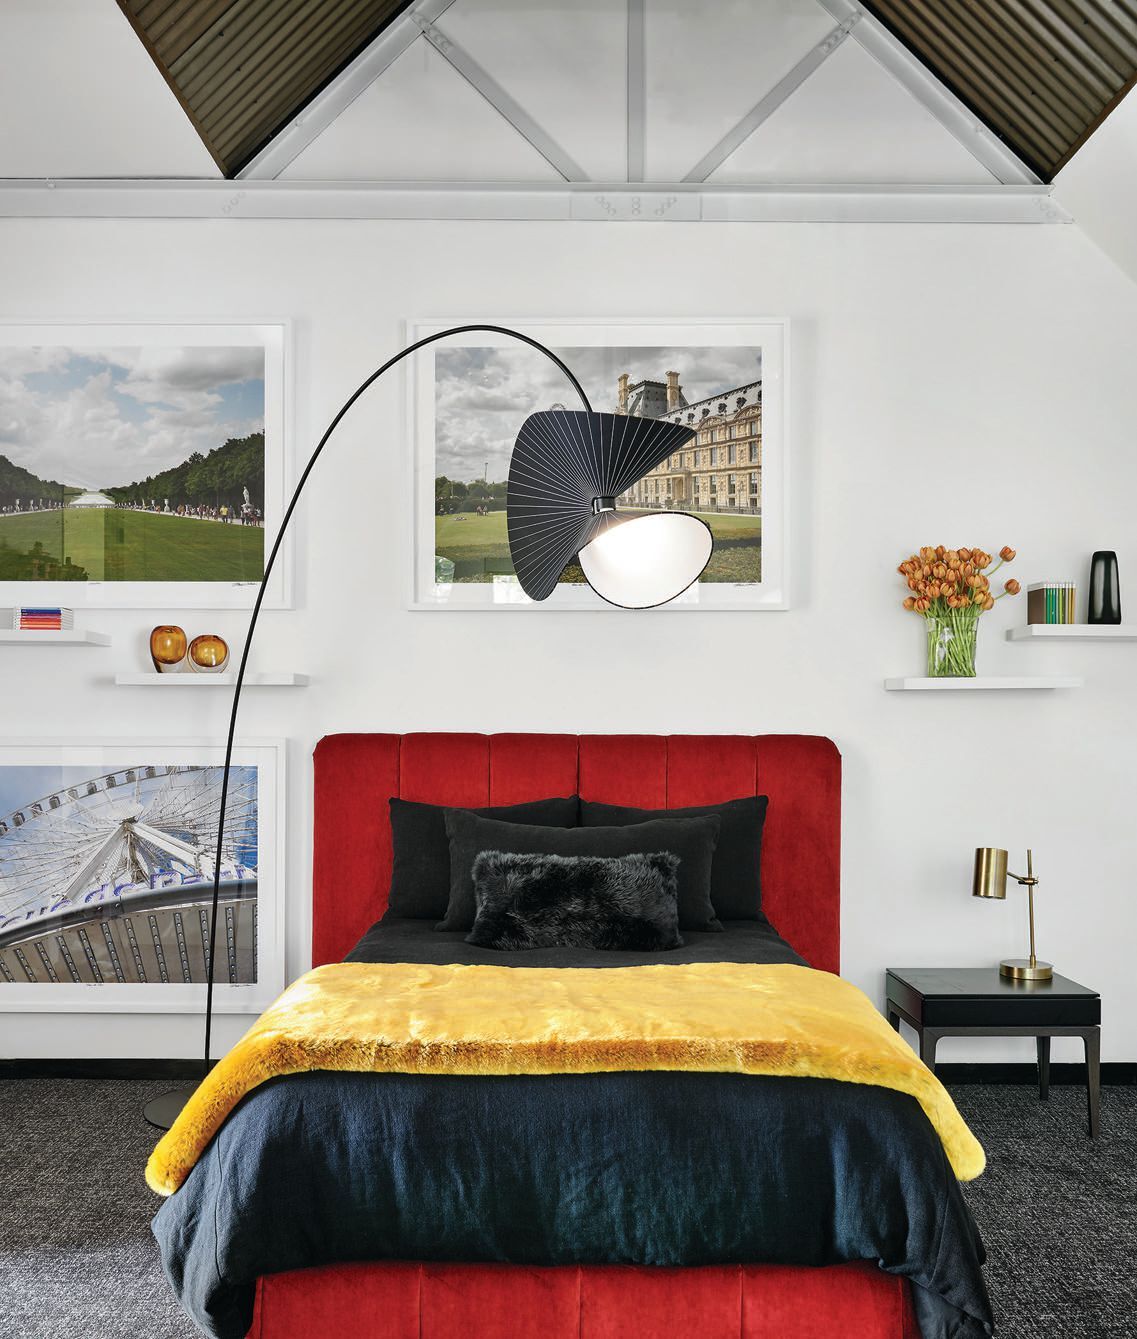 The interior of the son’s room is inspired in coloration and design by visits to Paris. 